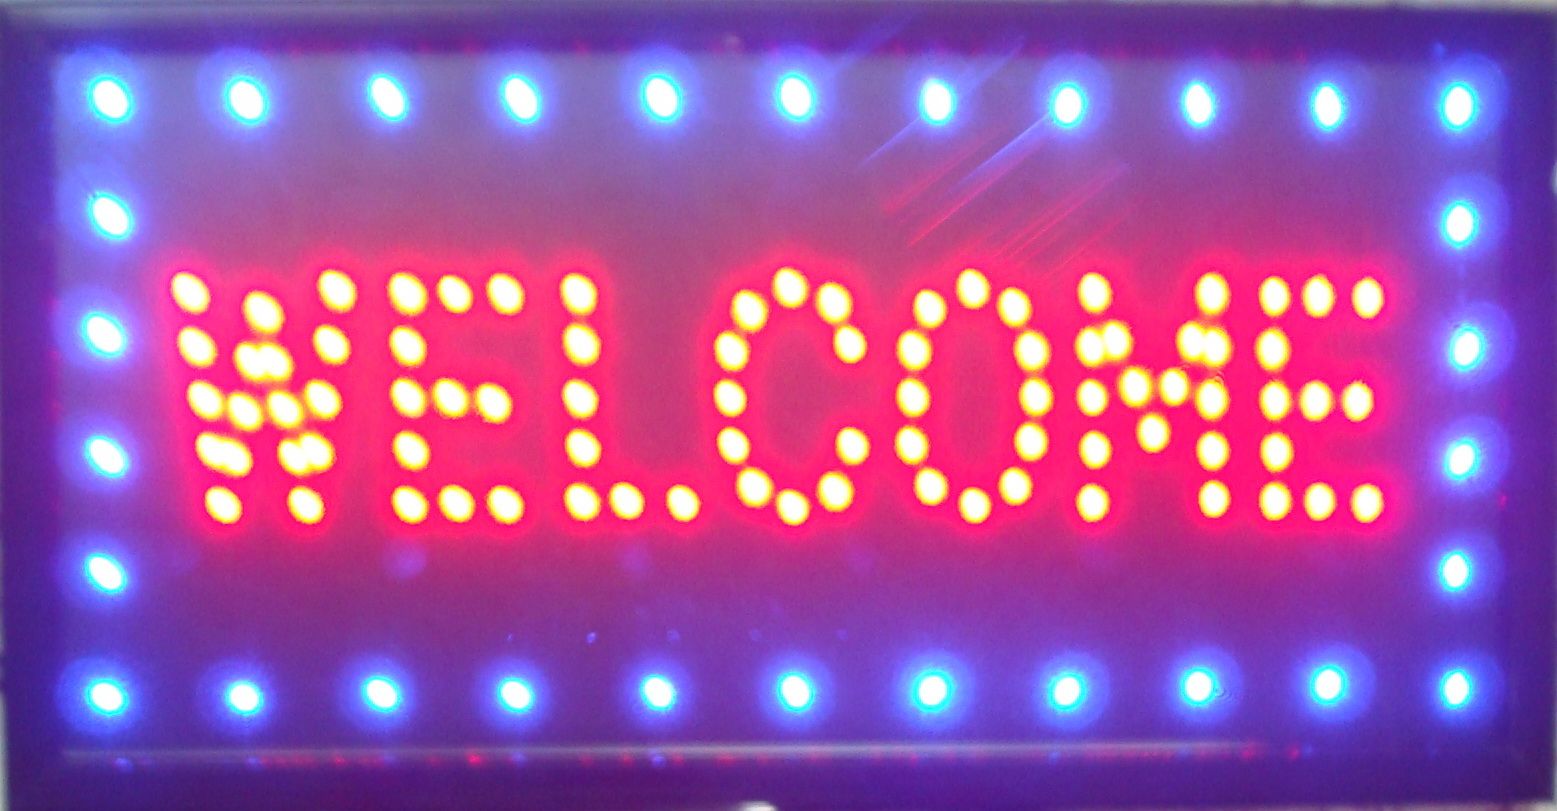 2019 Led Neon Light Welcome Sign With Animation Onoff Switchs For